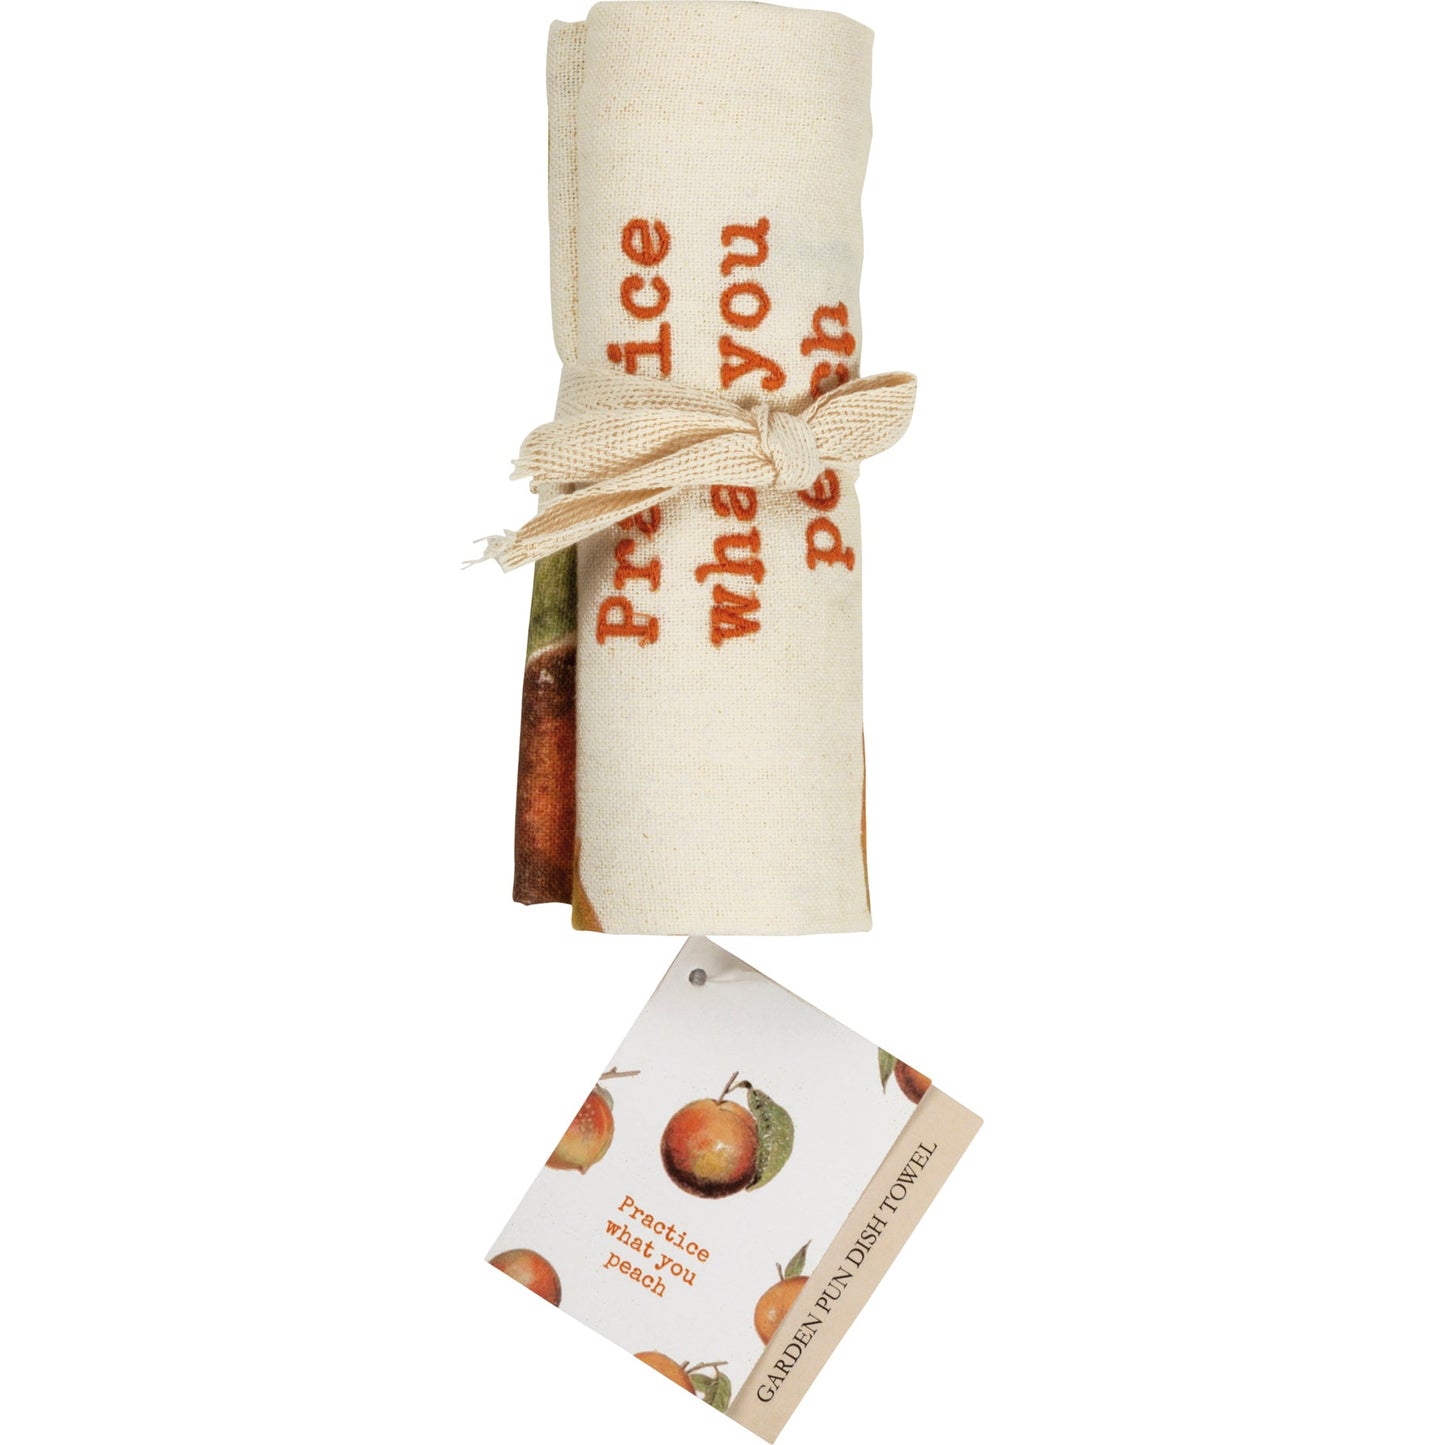 Practice What You Peach Funny Dish Cloth Towel | Cotton and Linen | Embroidered Text | 18" x 28"